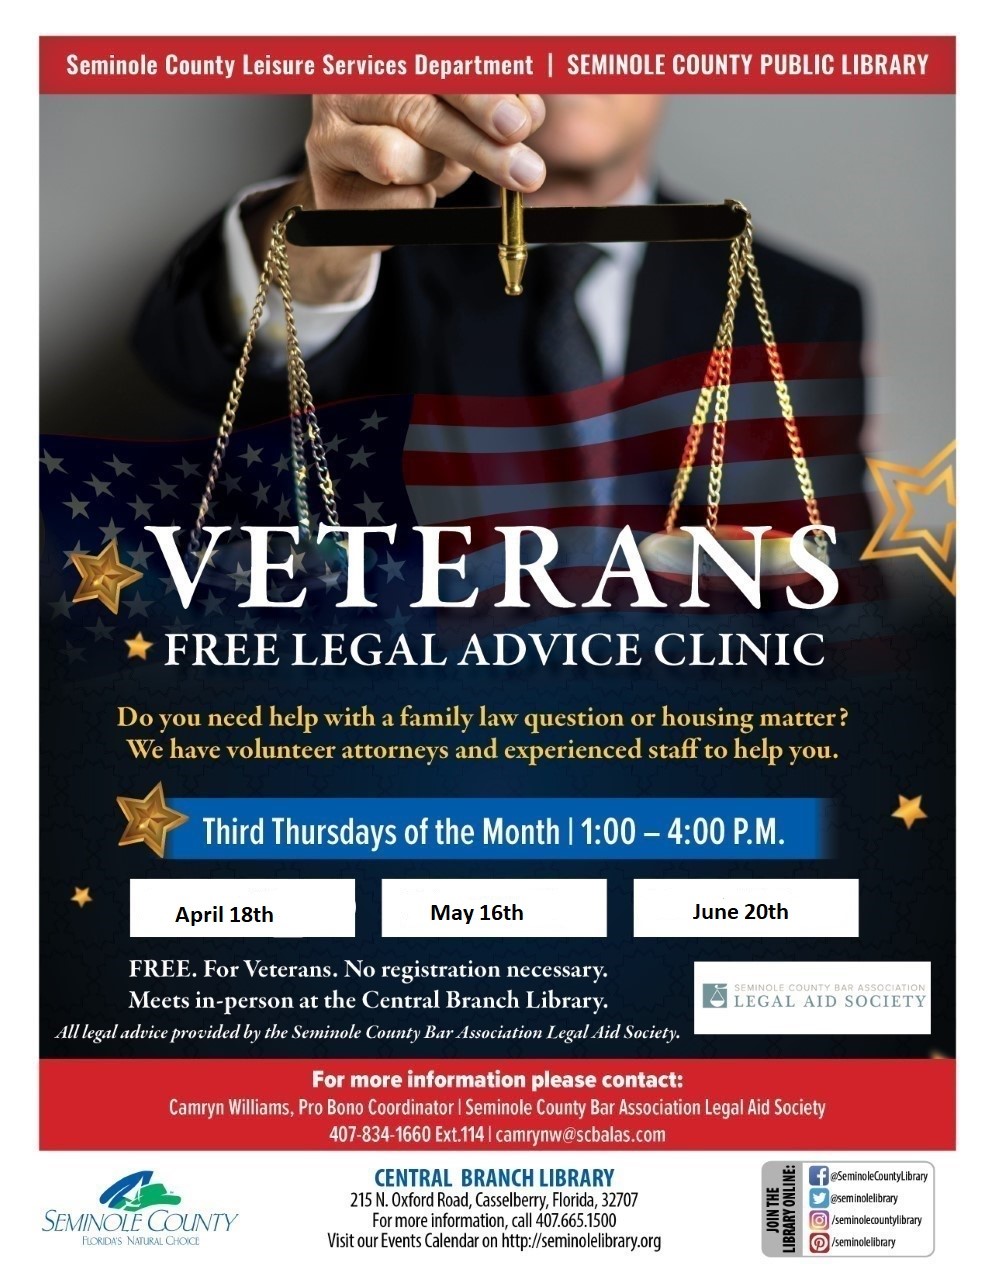 Veterans Free Legal Advice Clinic at Central Branch